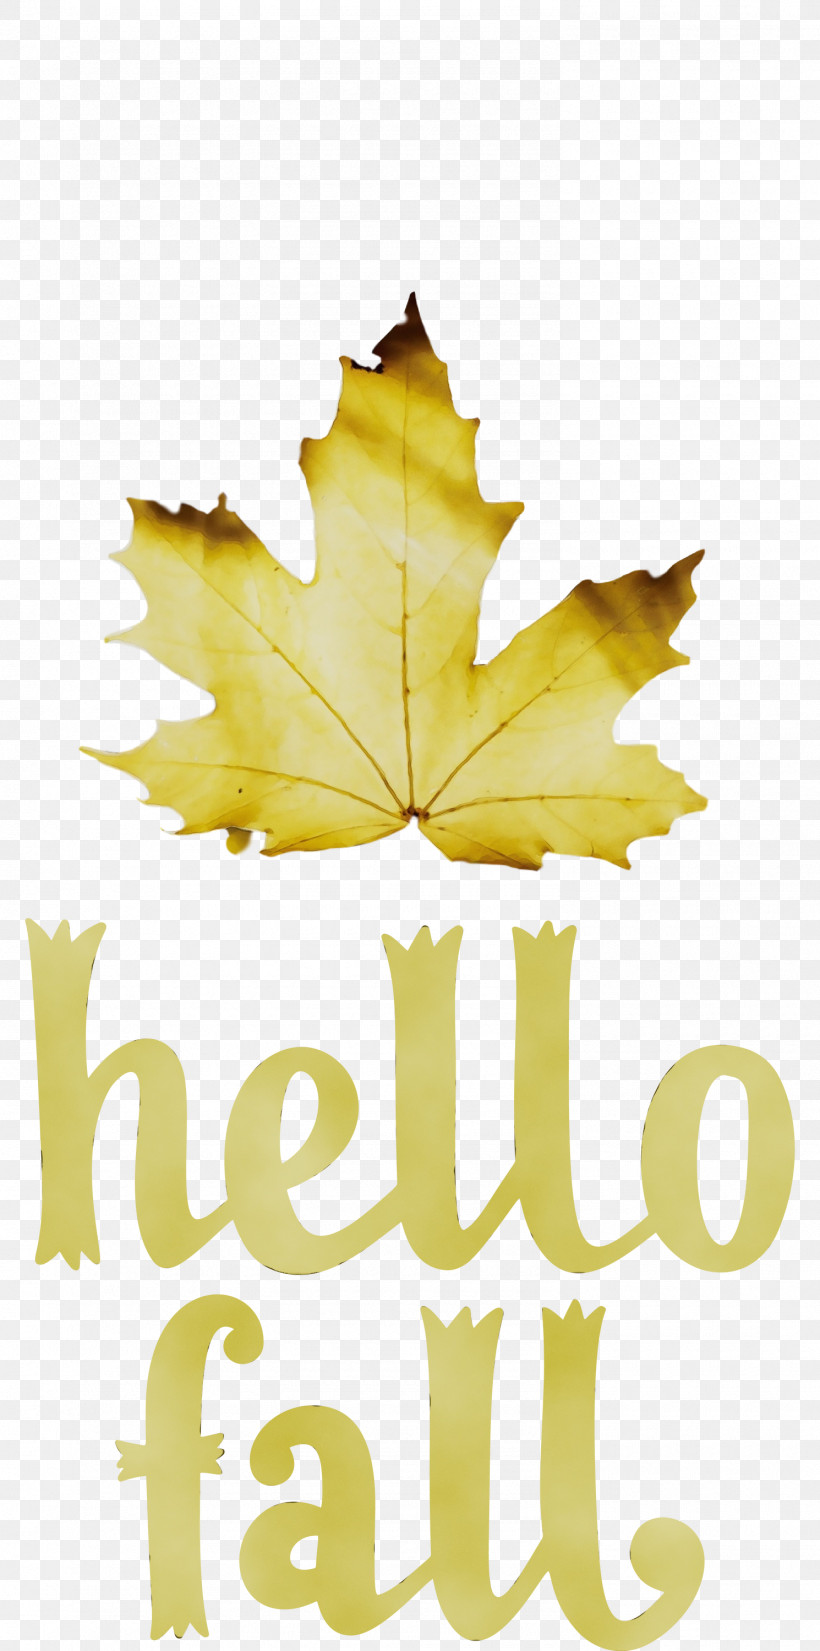 Leaf Maple Leaf / M Yellow Font Tree, PNG, 1490x3000px, Hello Fall, Autumn, Biology, Fall, Leaf Download Free